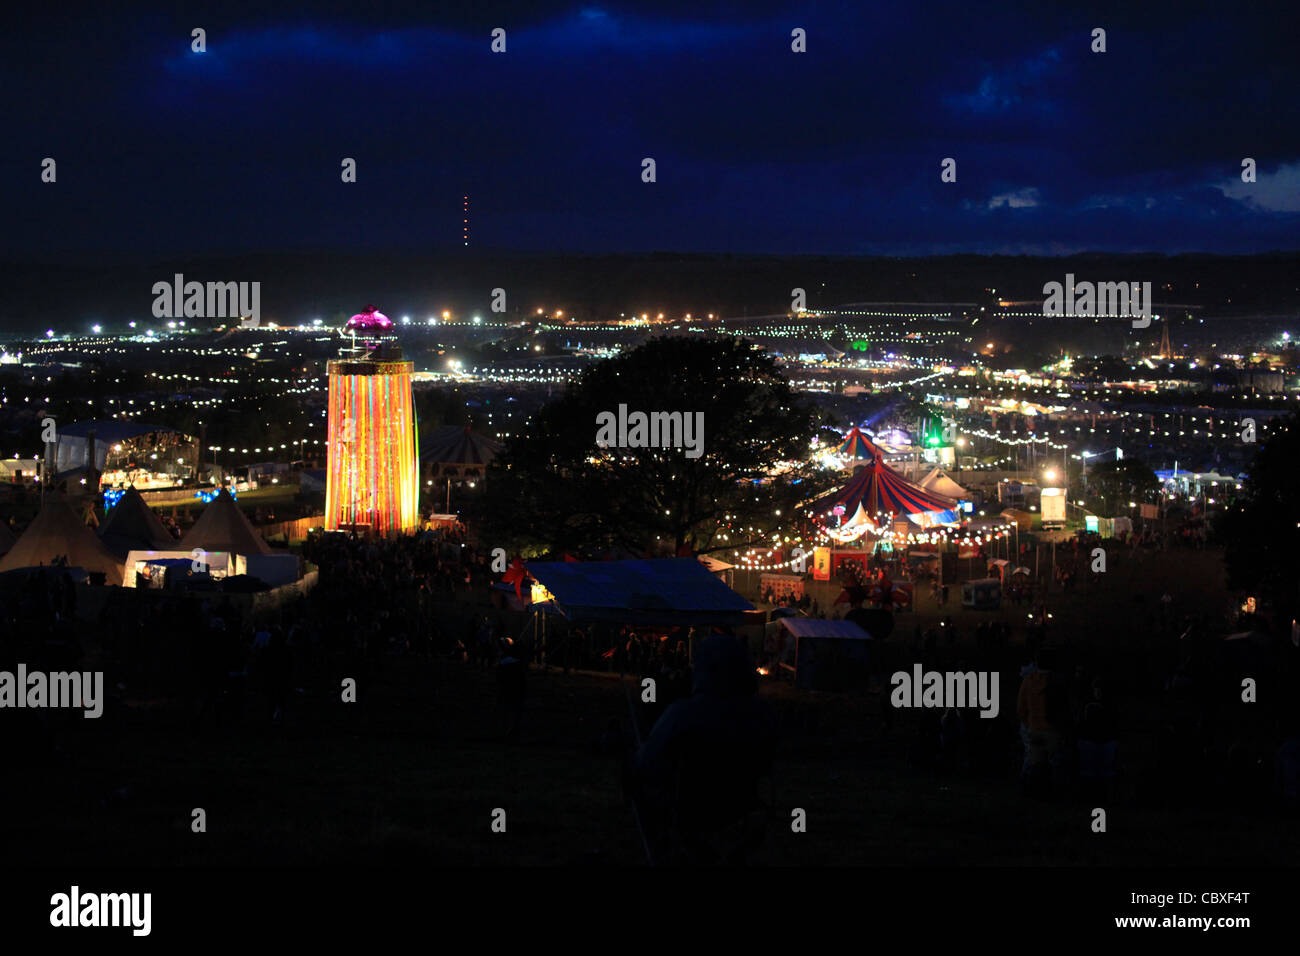 Night time view overlooking part of the Glastonbury Music Festival 2011, UK Stock Photo